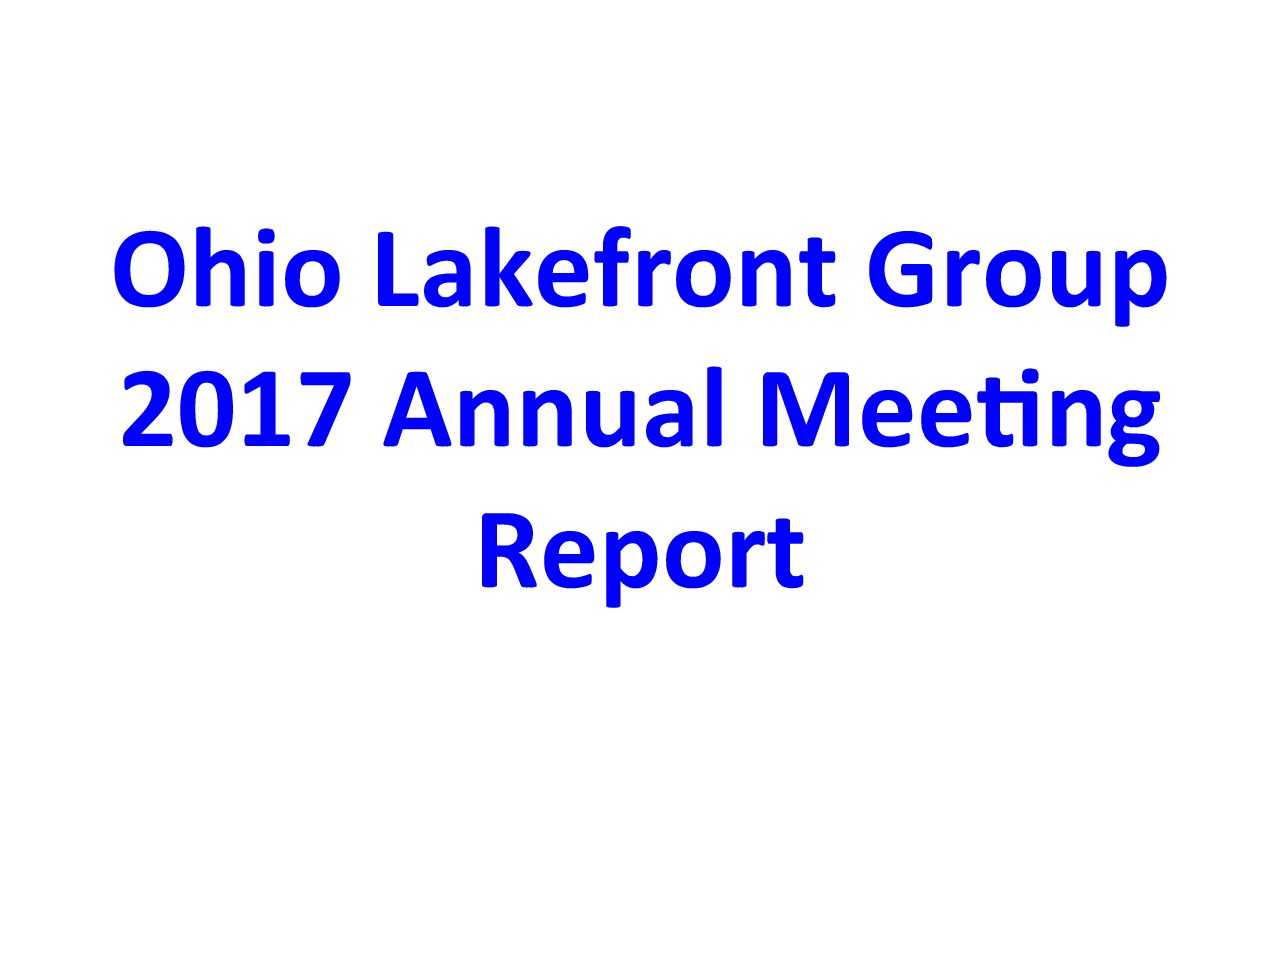 2017 Ohio Lakefront Group Annual Meeting Report